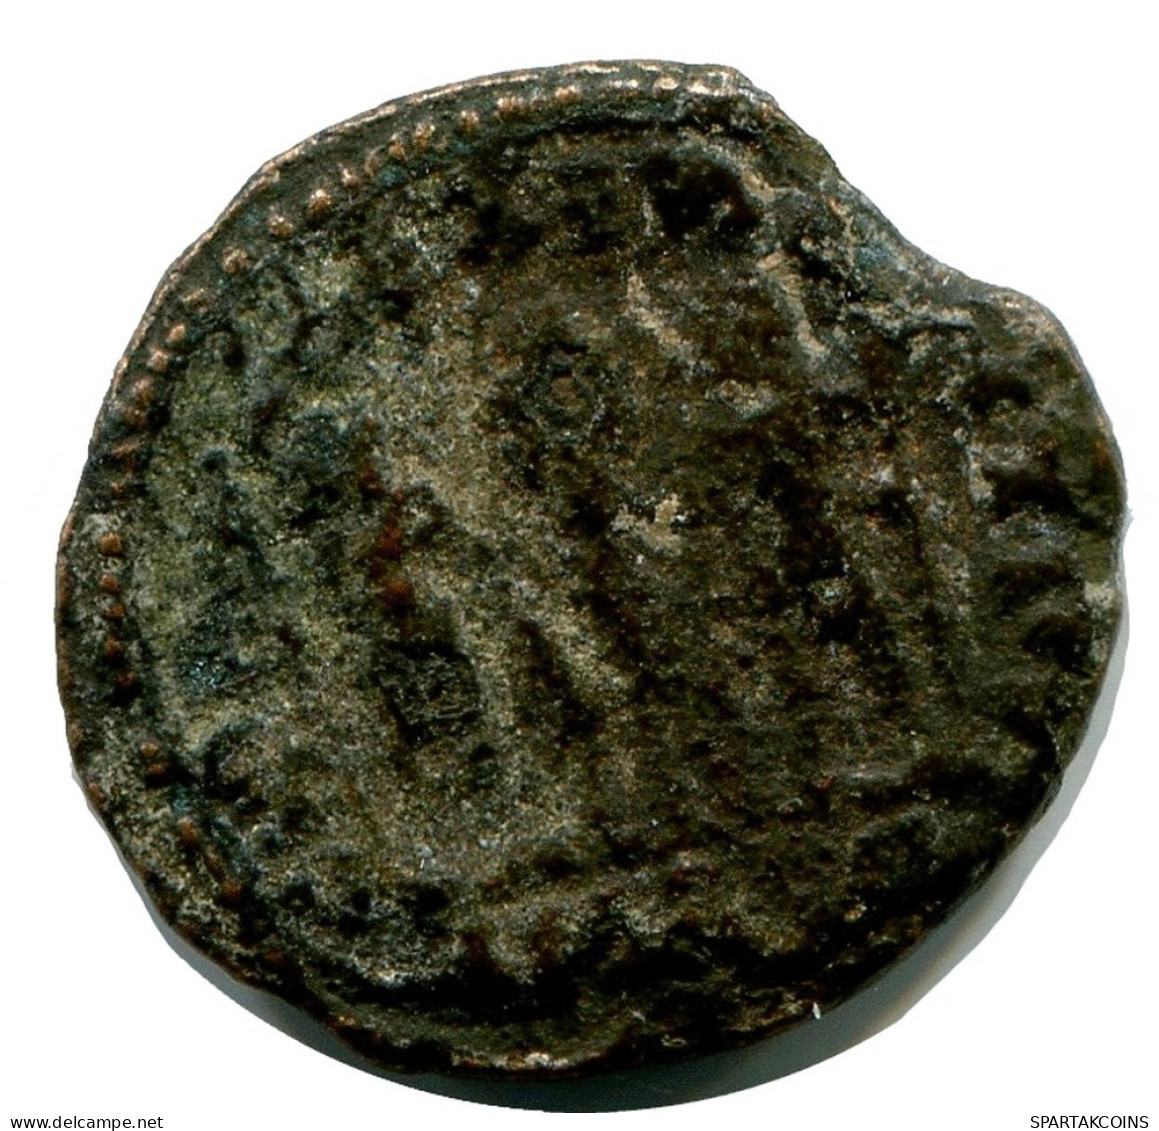 ROMAN Coin MINTED IN ALEKSANDRIA FOUND IN IHNASYAH HOARD EGYPT #ANC10172.14.U.A - The Christian Empire (307 AD Tot 363 AD)